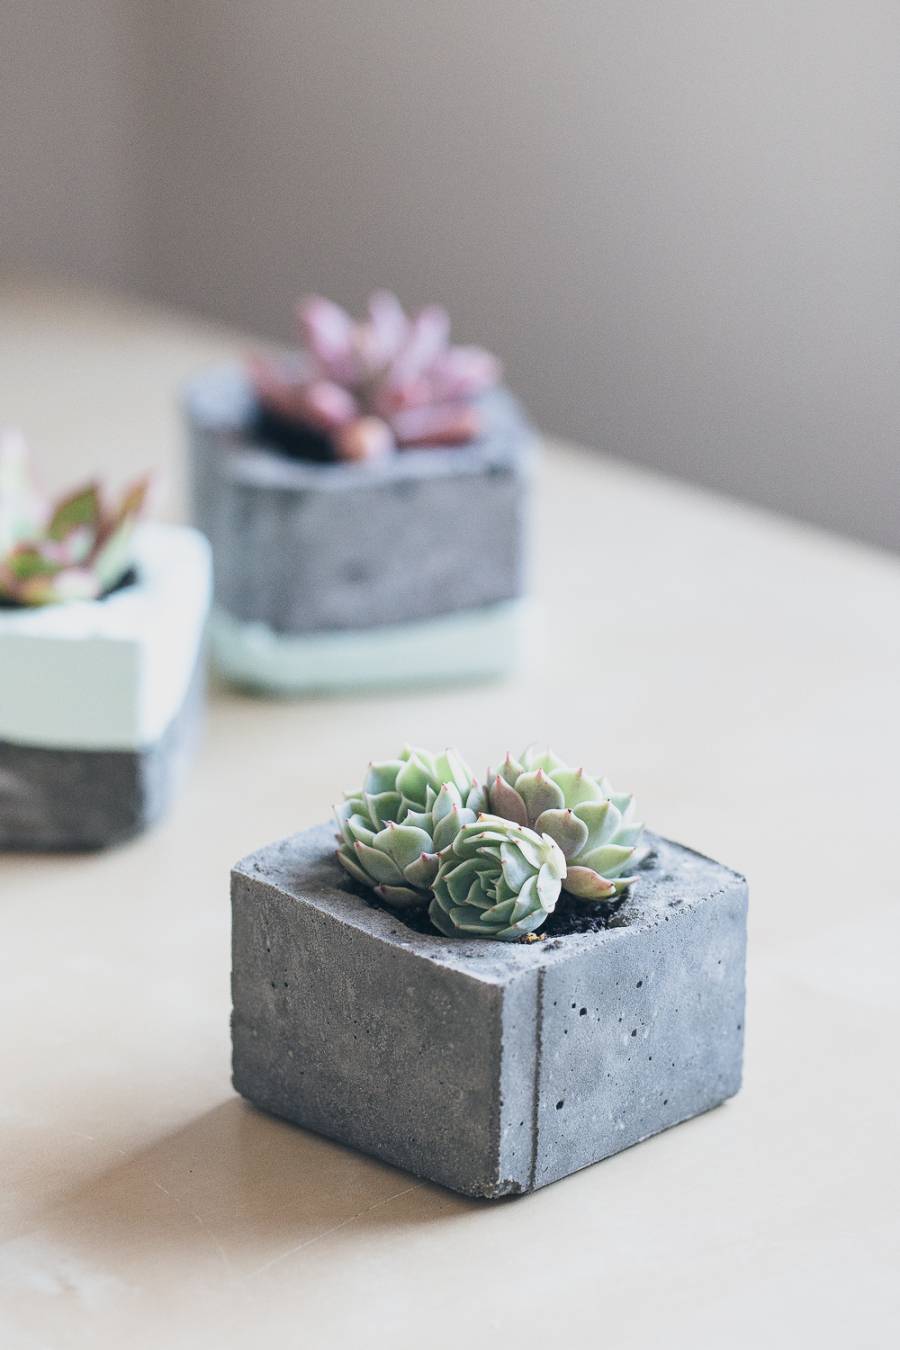 These DIY concrete planters from Erin Made This are the perfect weekend project.